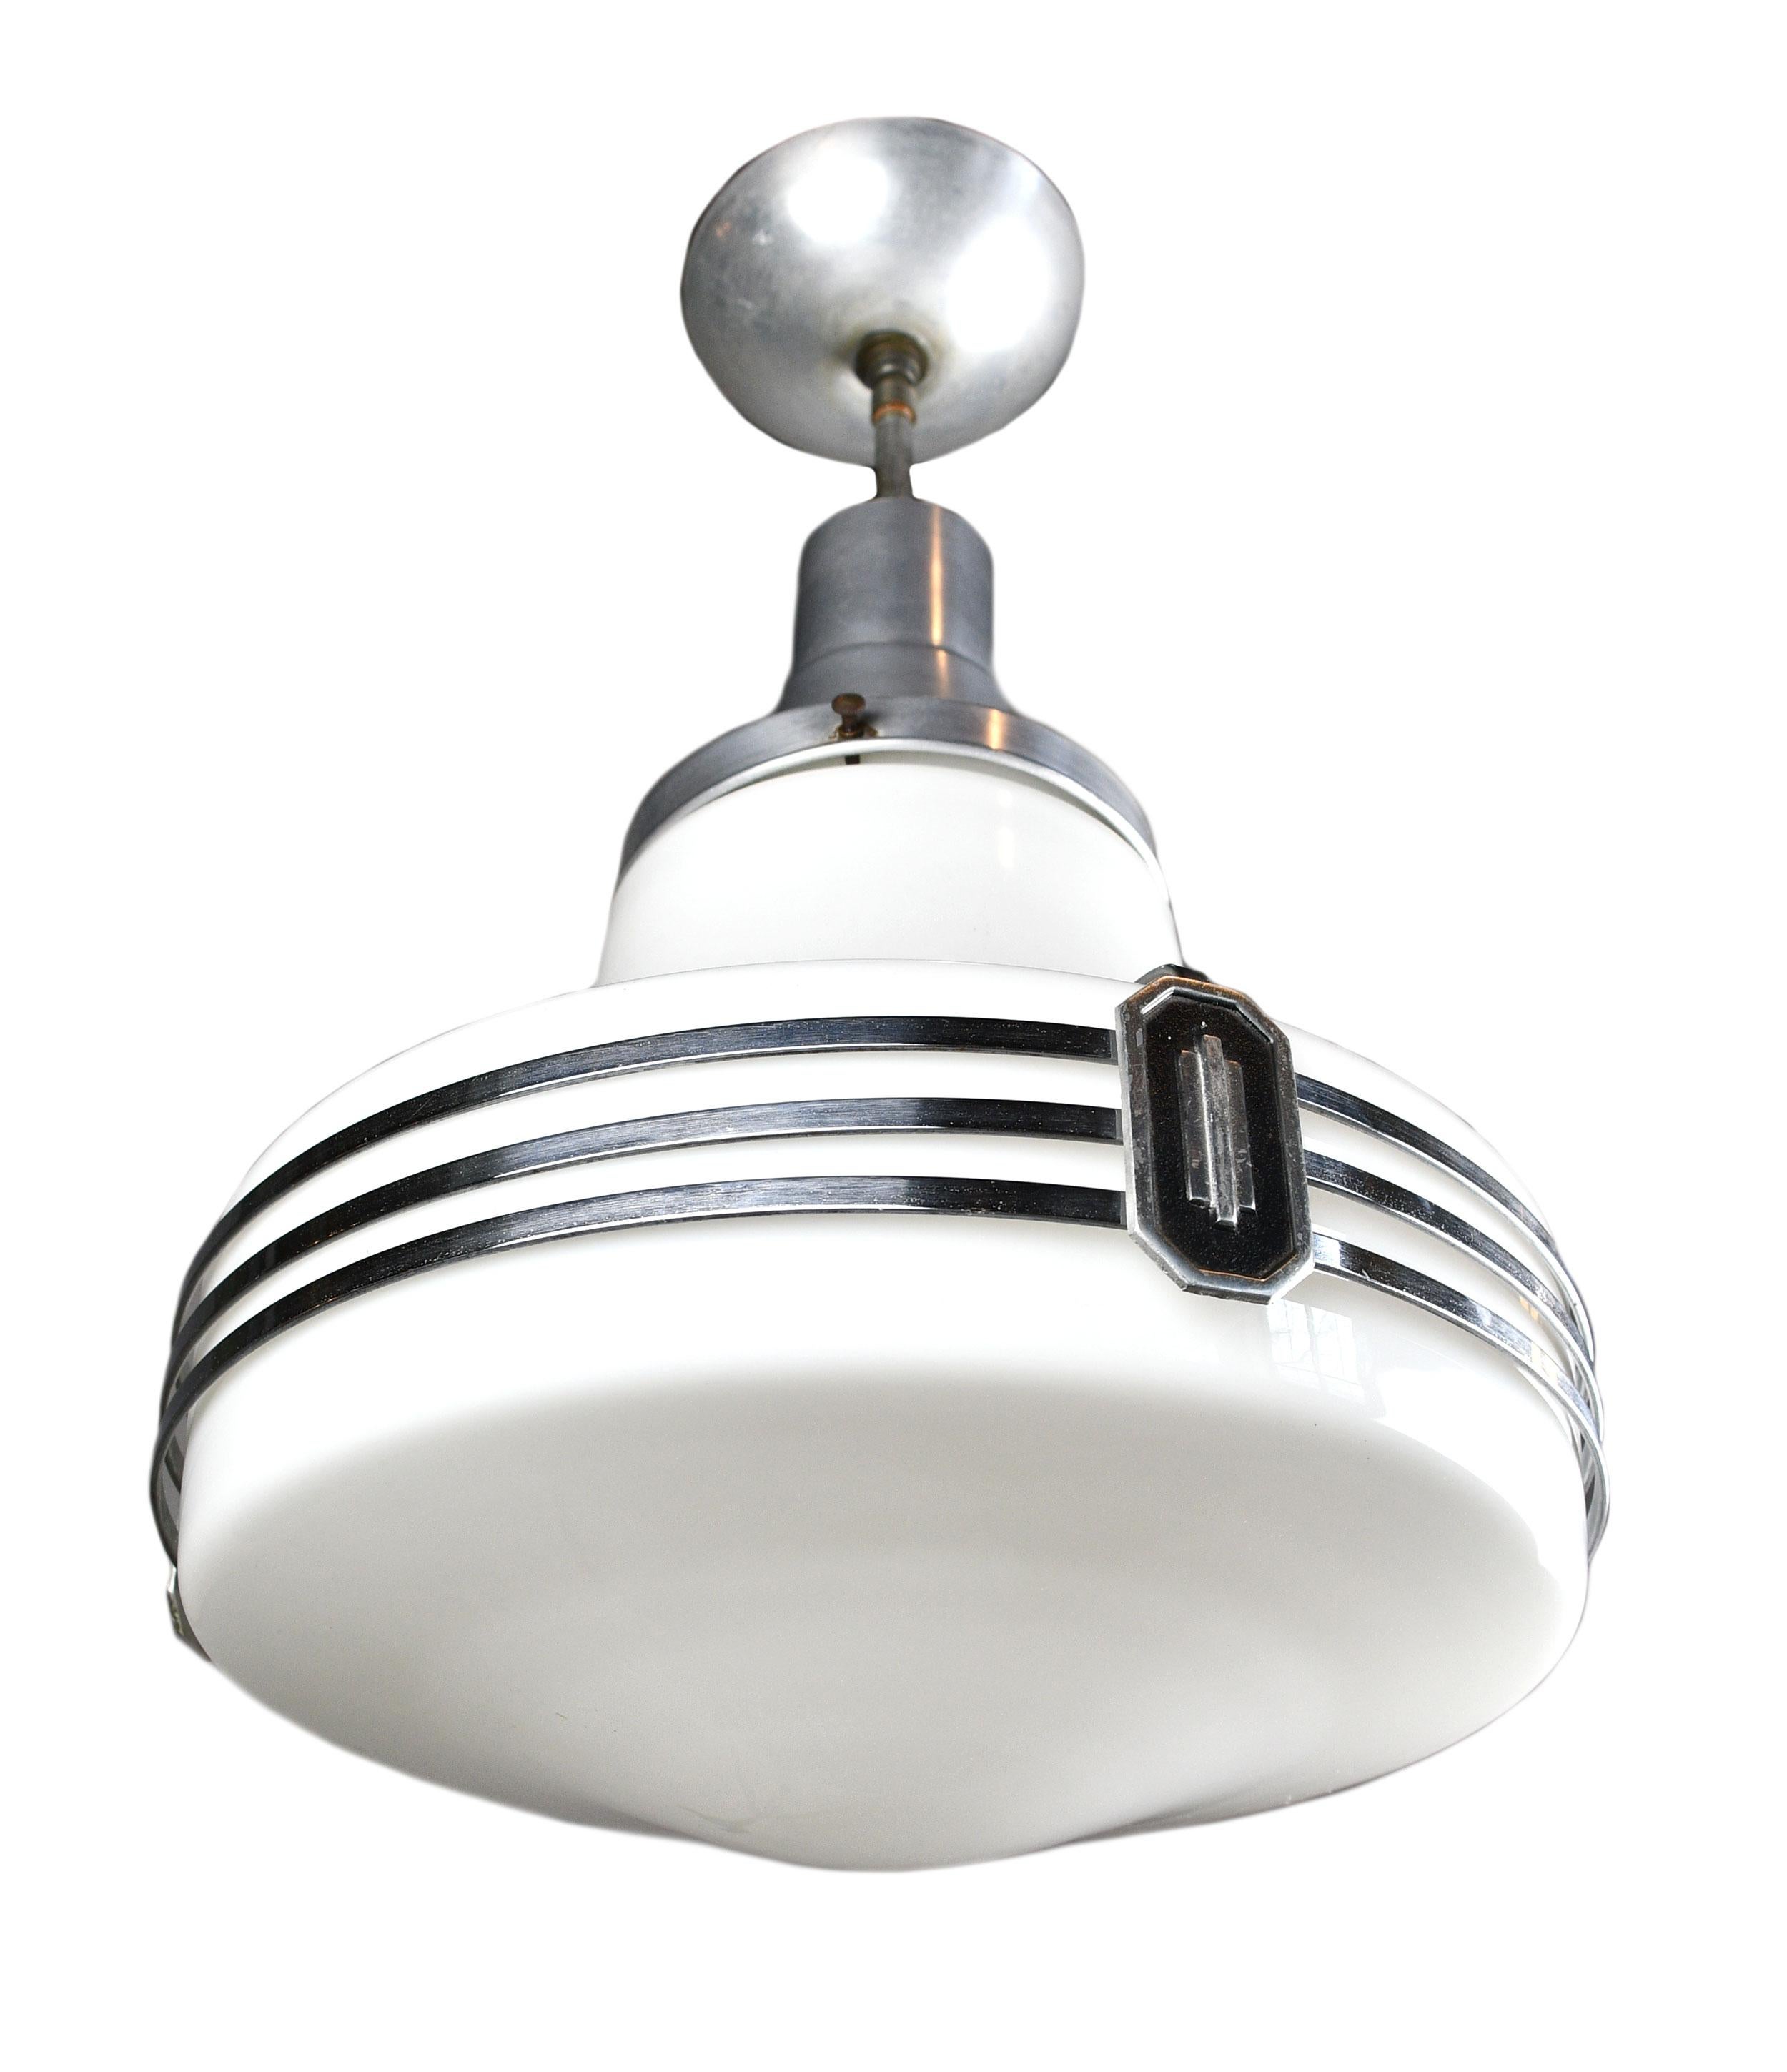 These uniquely crafted pendants feature an Art Deco Space Age atomic design and reflective spun aluminum.